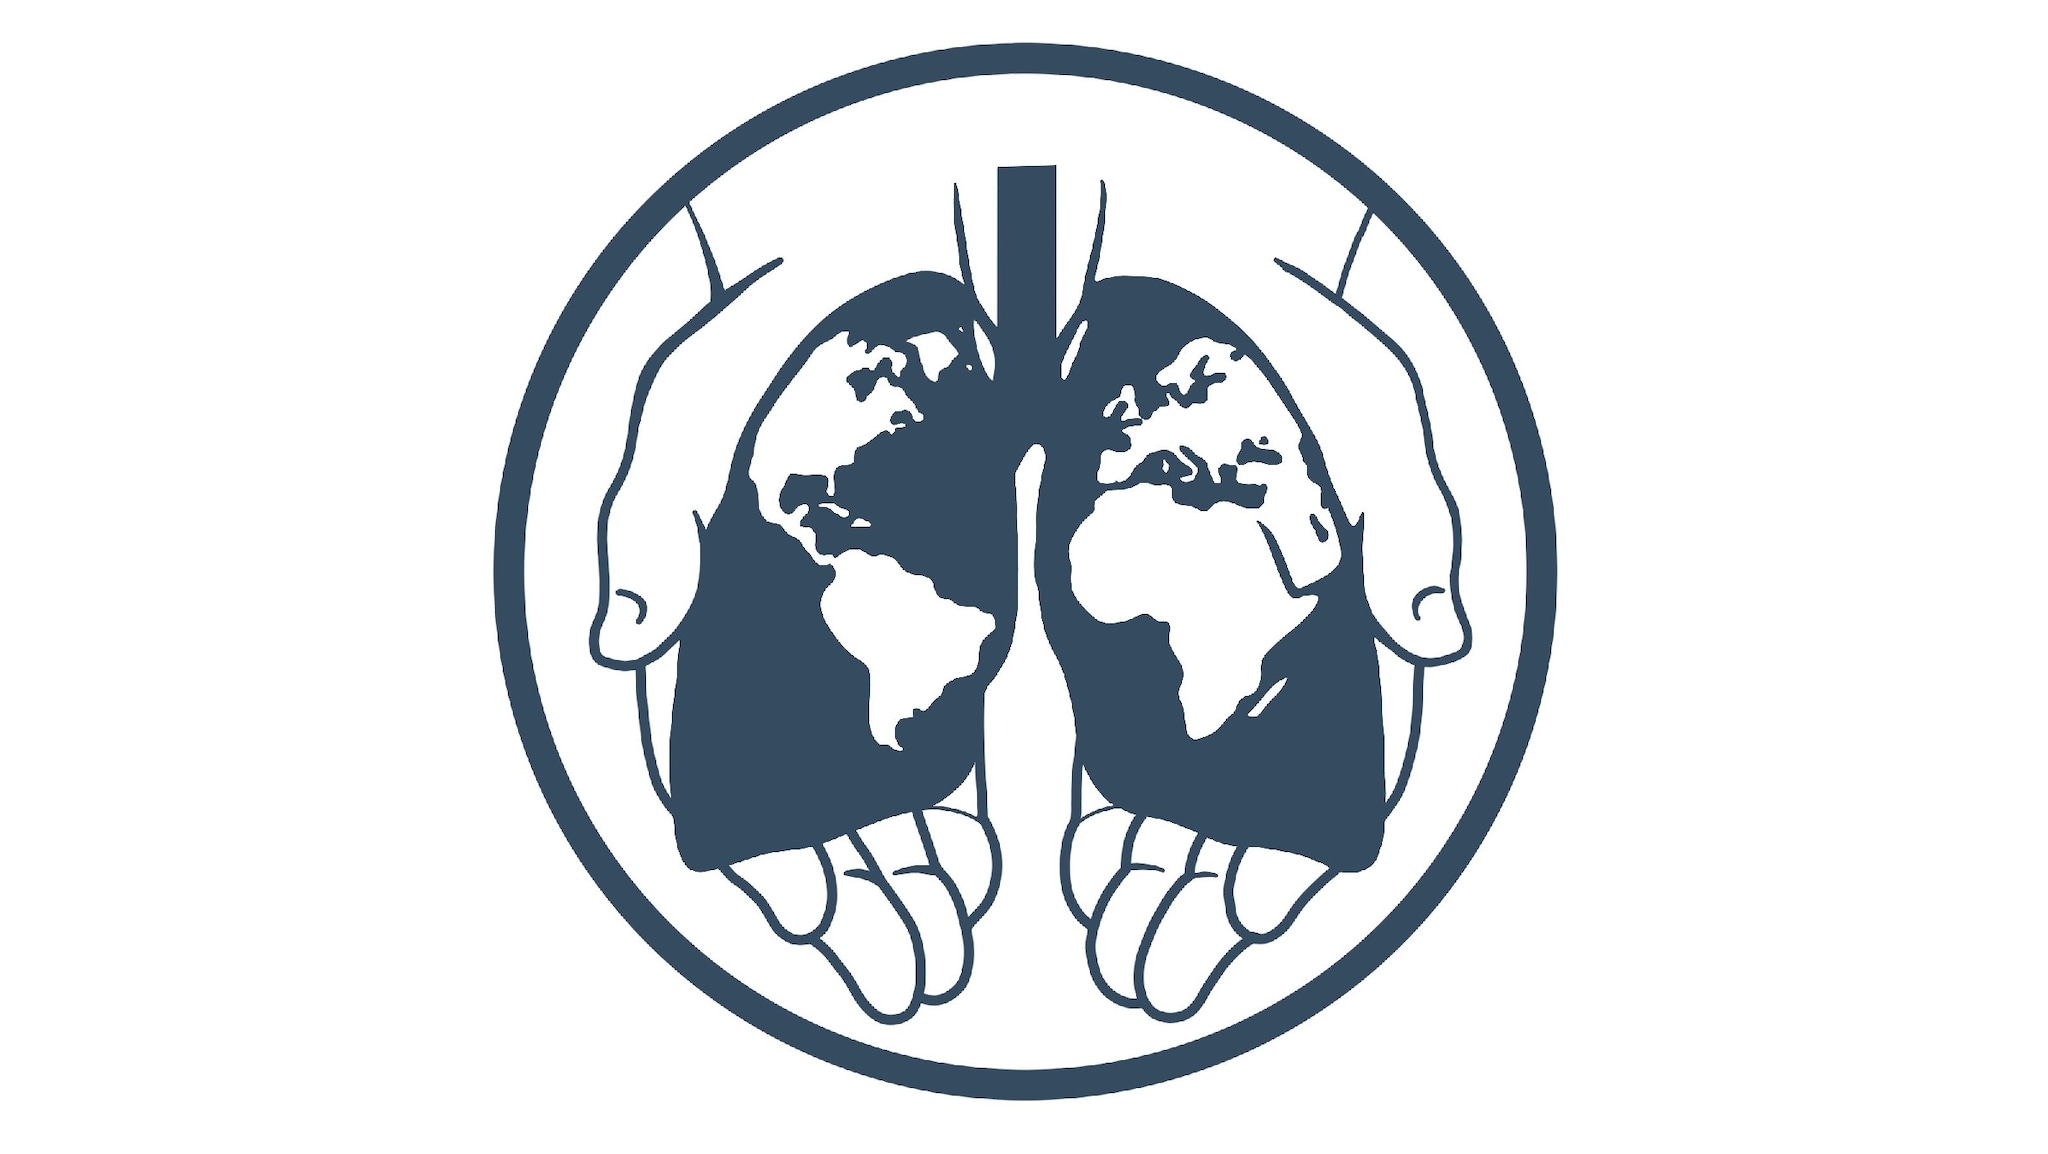 CureTB graphic of world map shaped as lungs held in hands